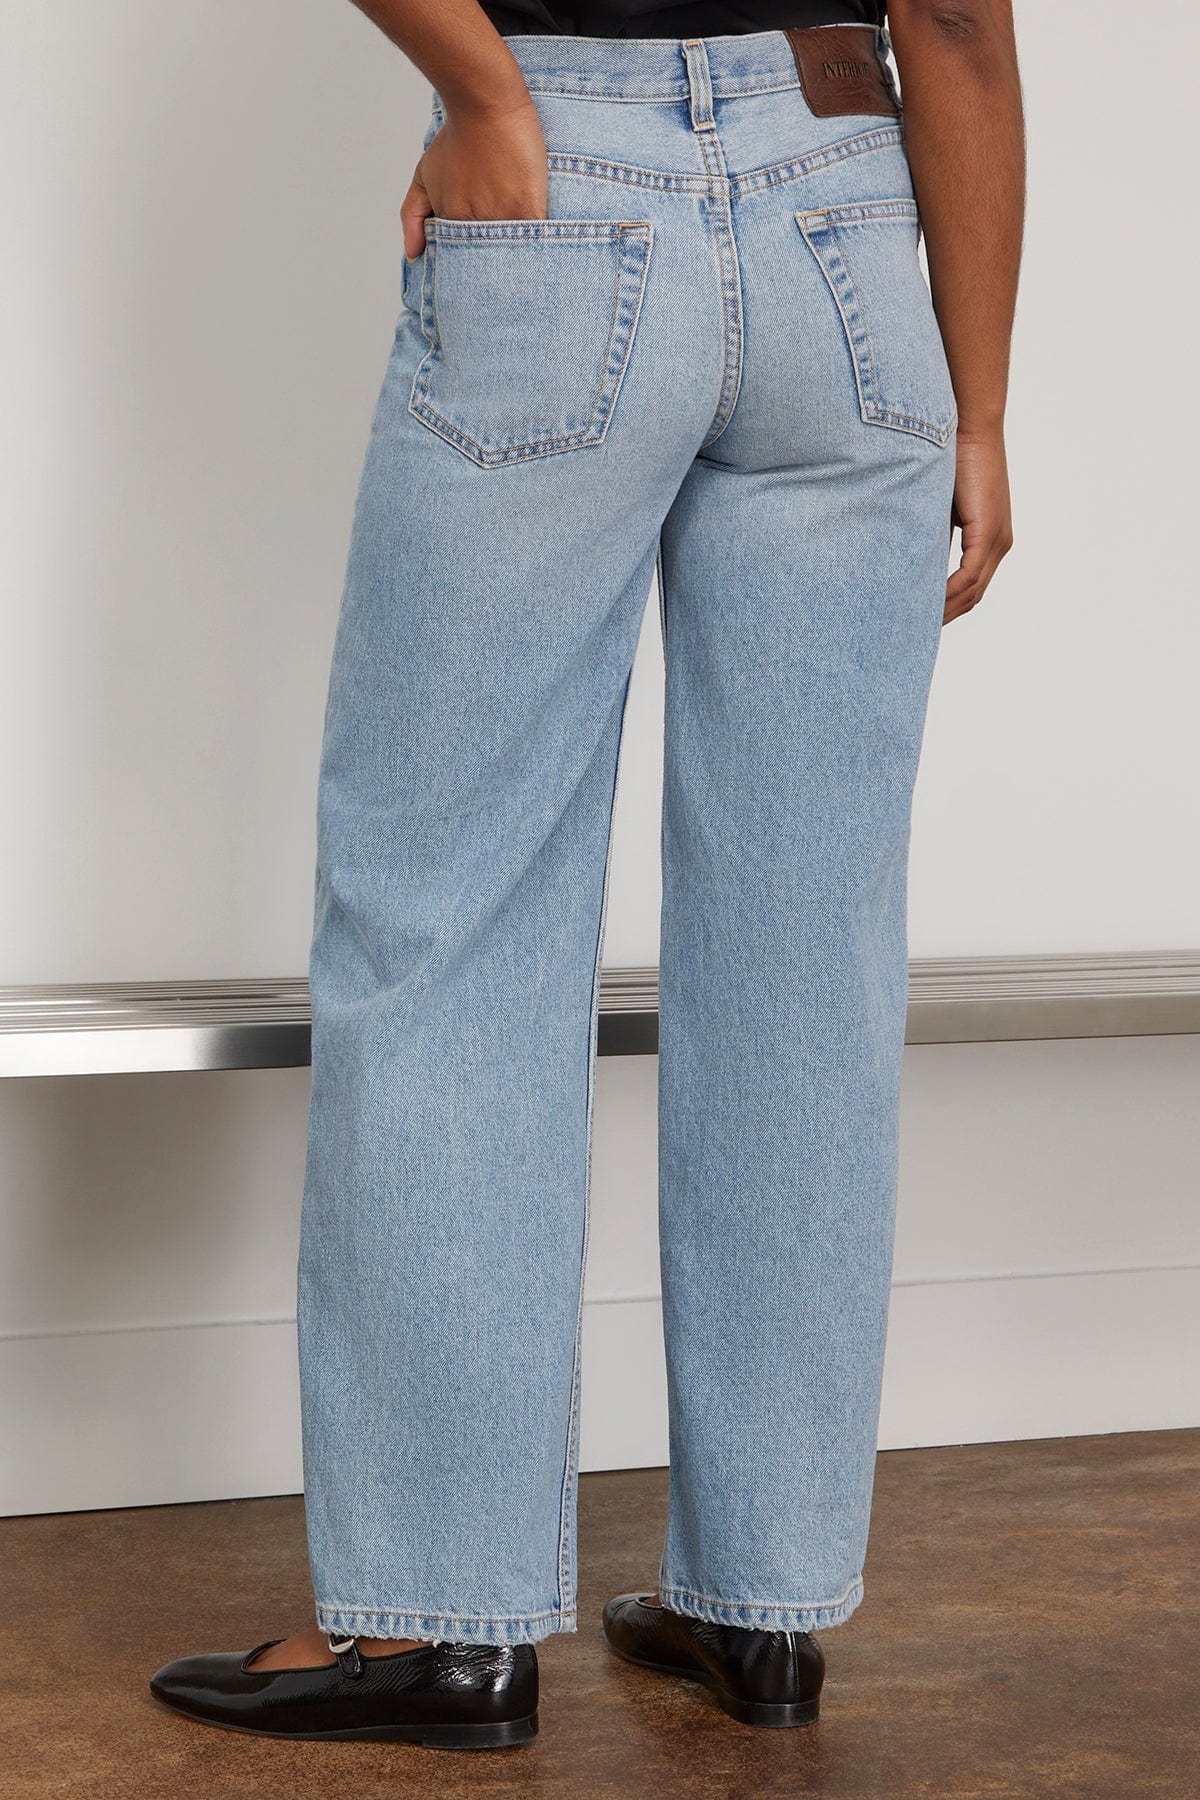 Interior Jeans The Remy Jean in Faded Interior The Remy Jean in Faded